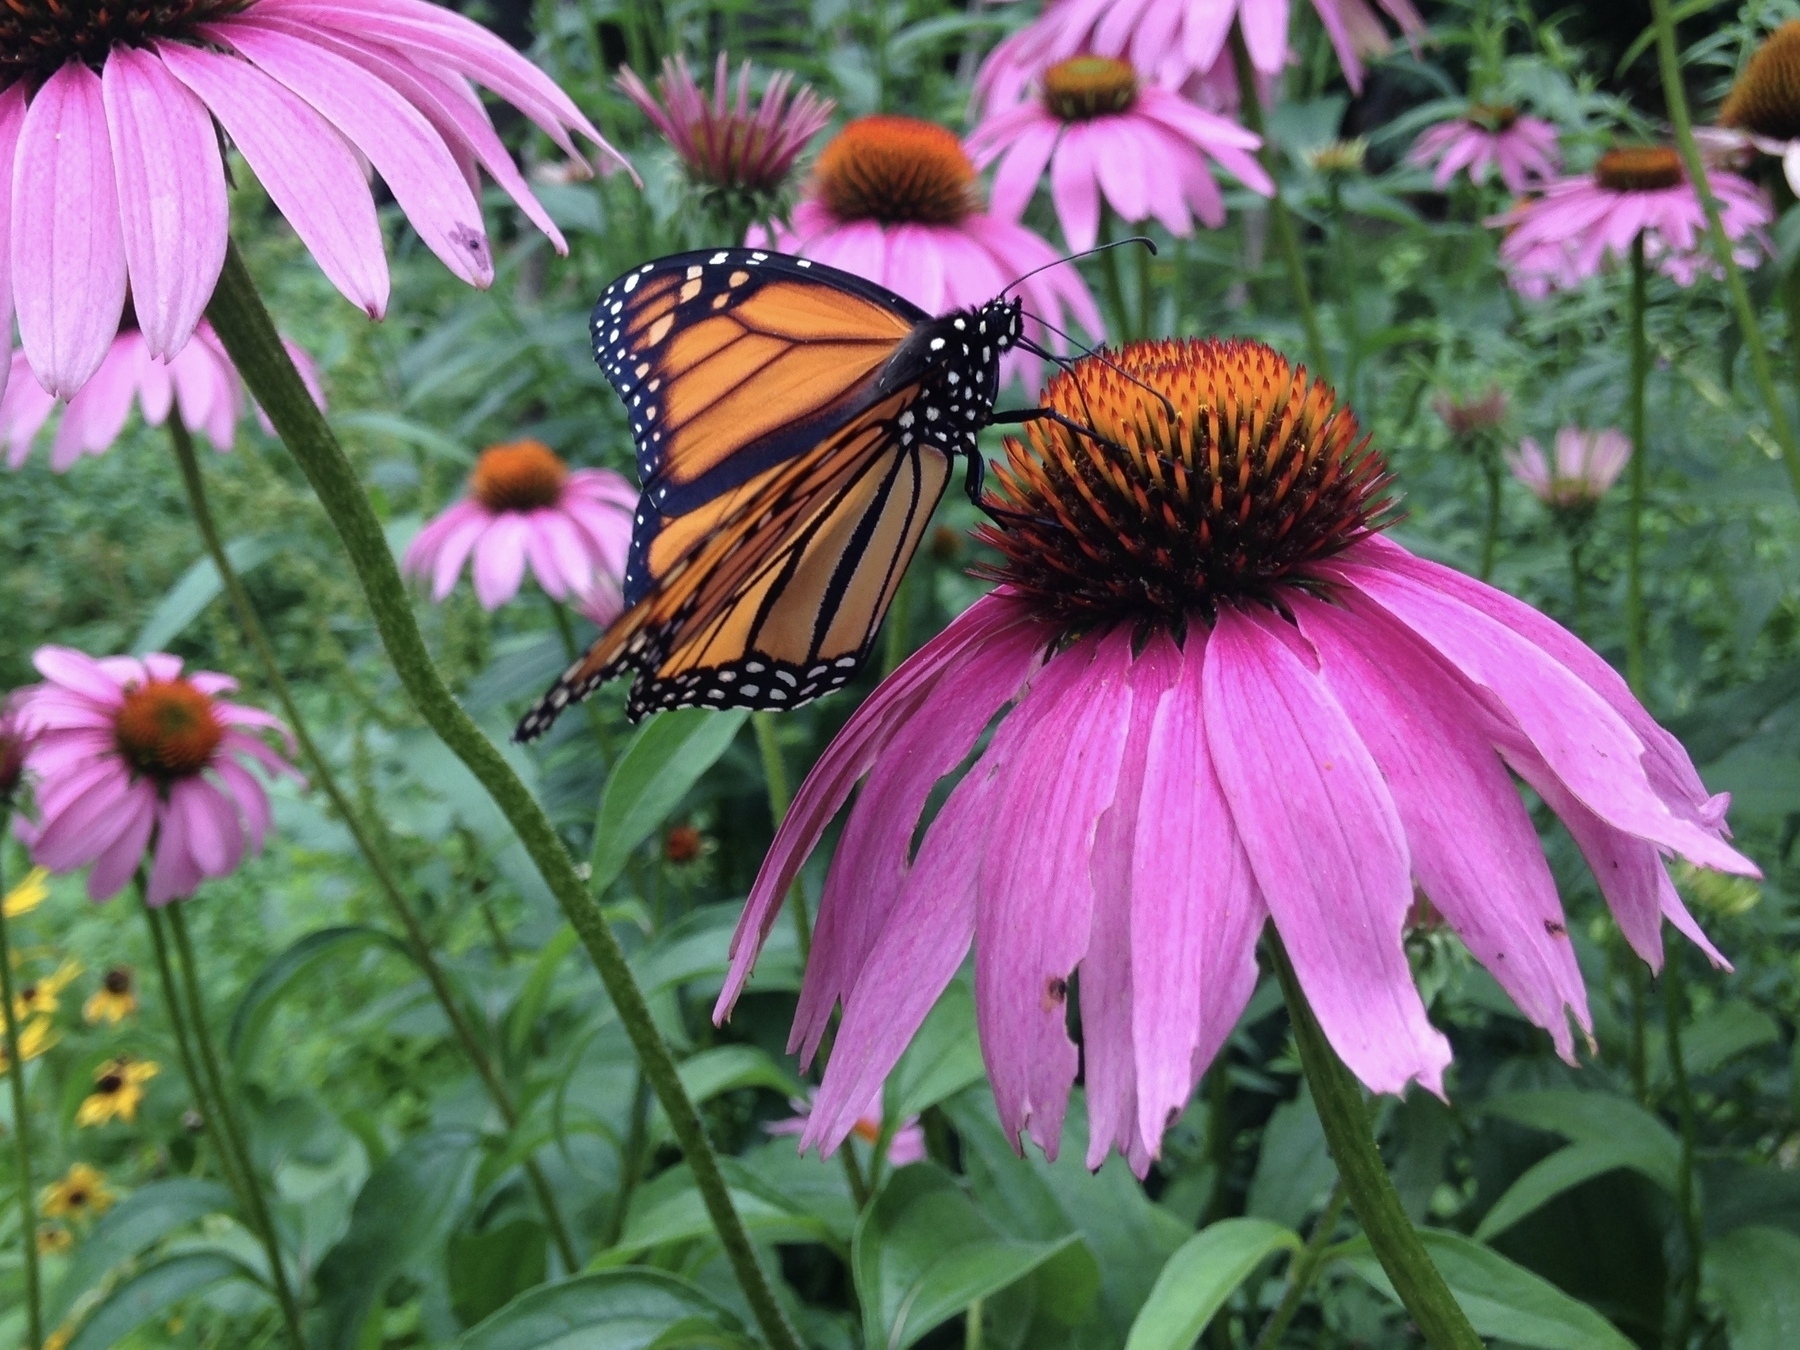 A monarch butterfly with its predominately orange and black wings rests upon a purple coneflower gathering nectar. Other purple coneflowers surround it